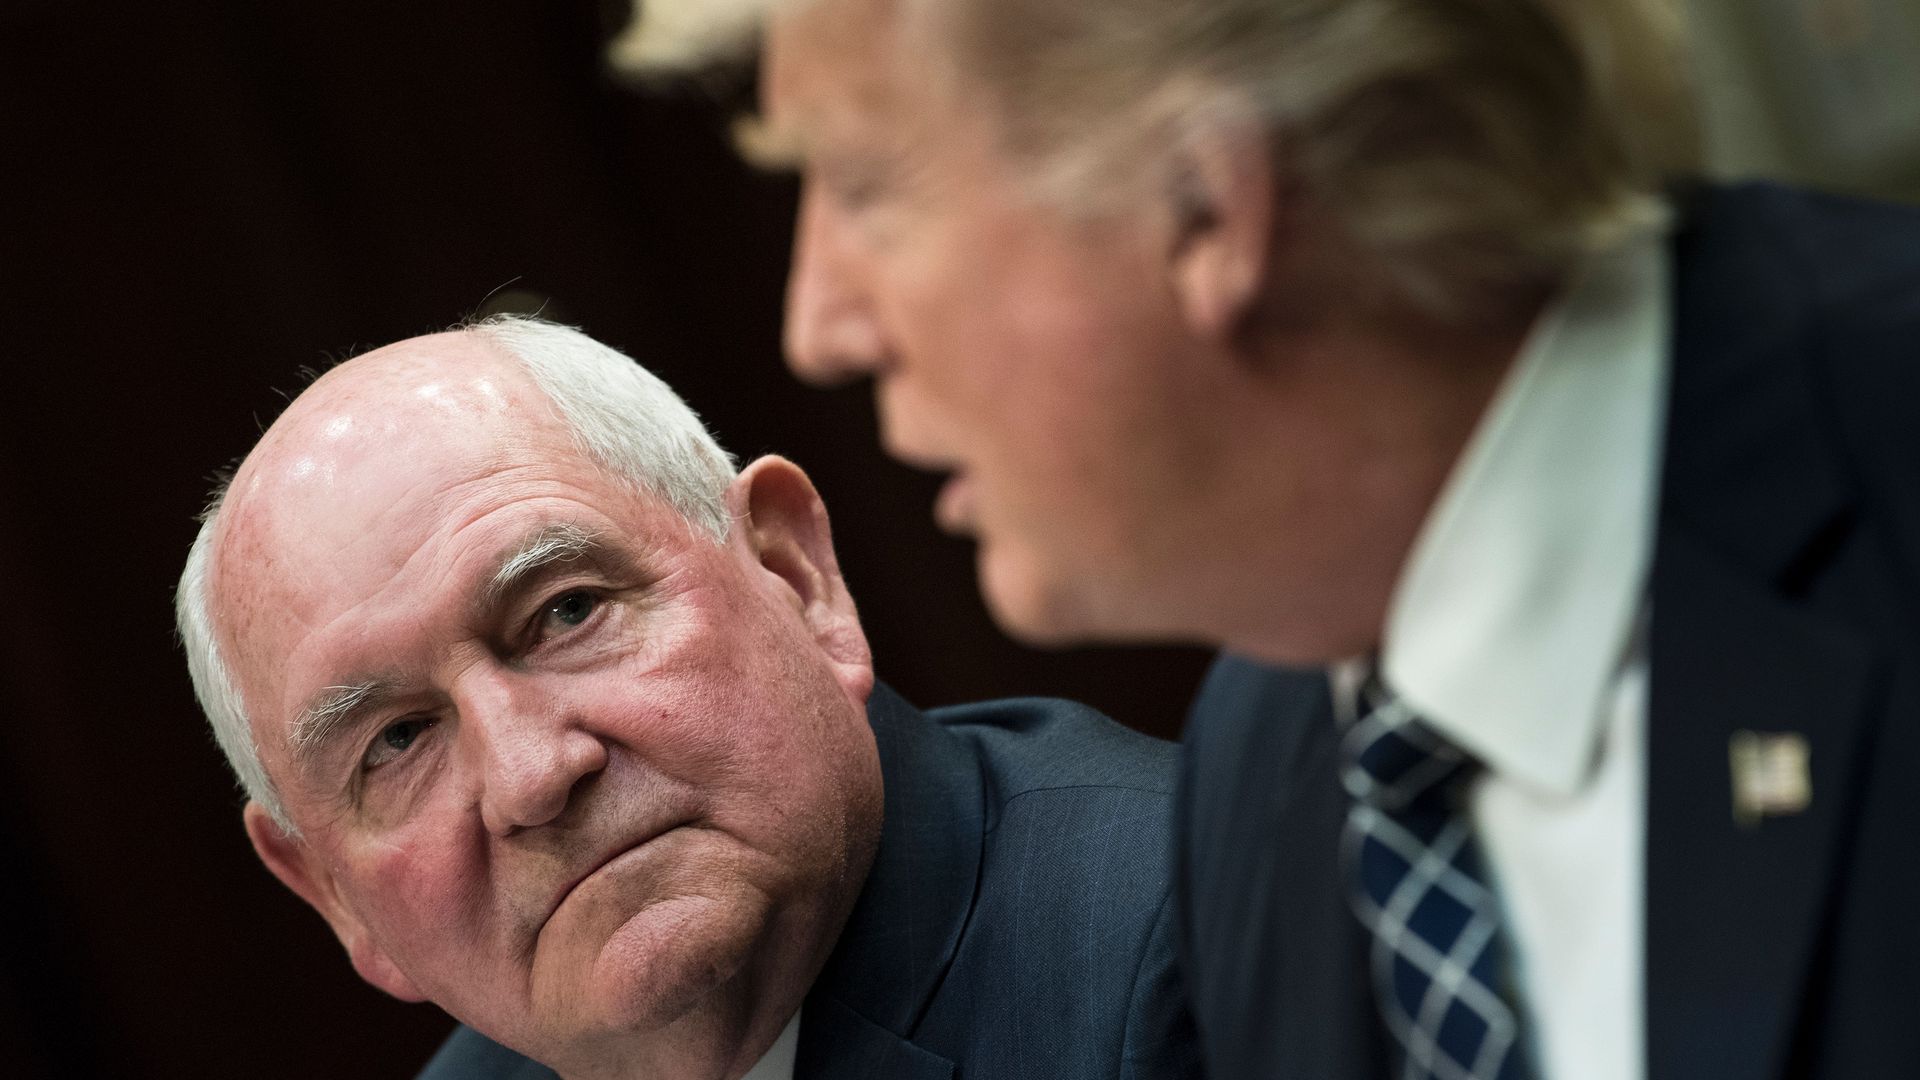 Sonny Perdue looks at Trump with a concerned look.